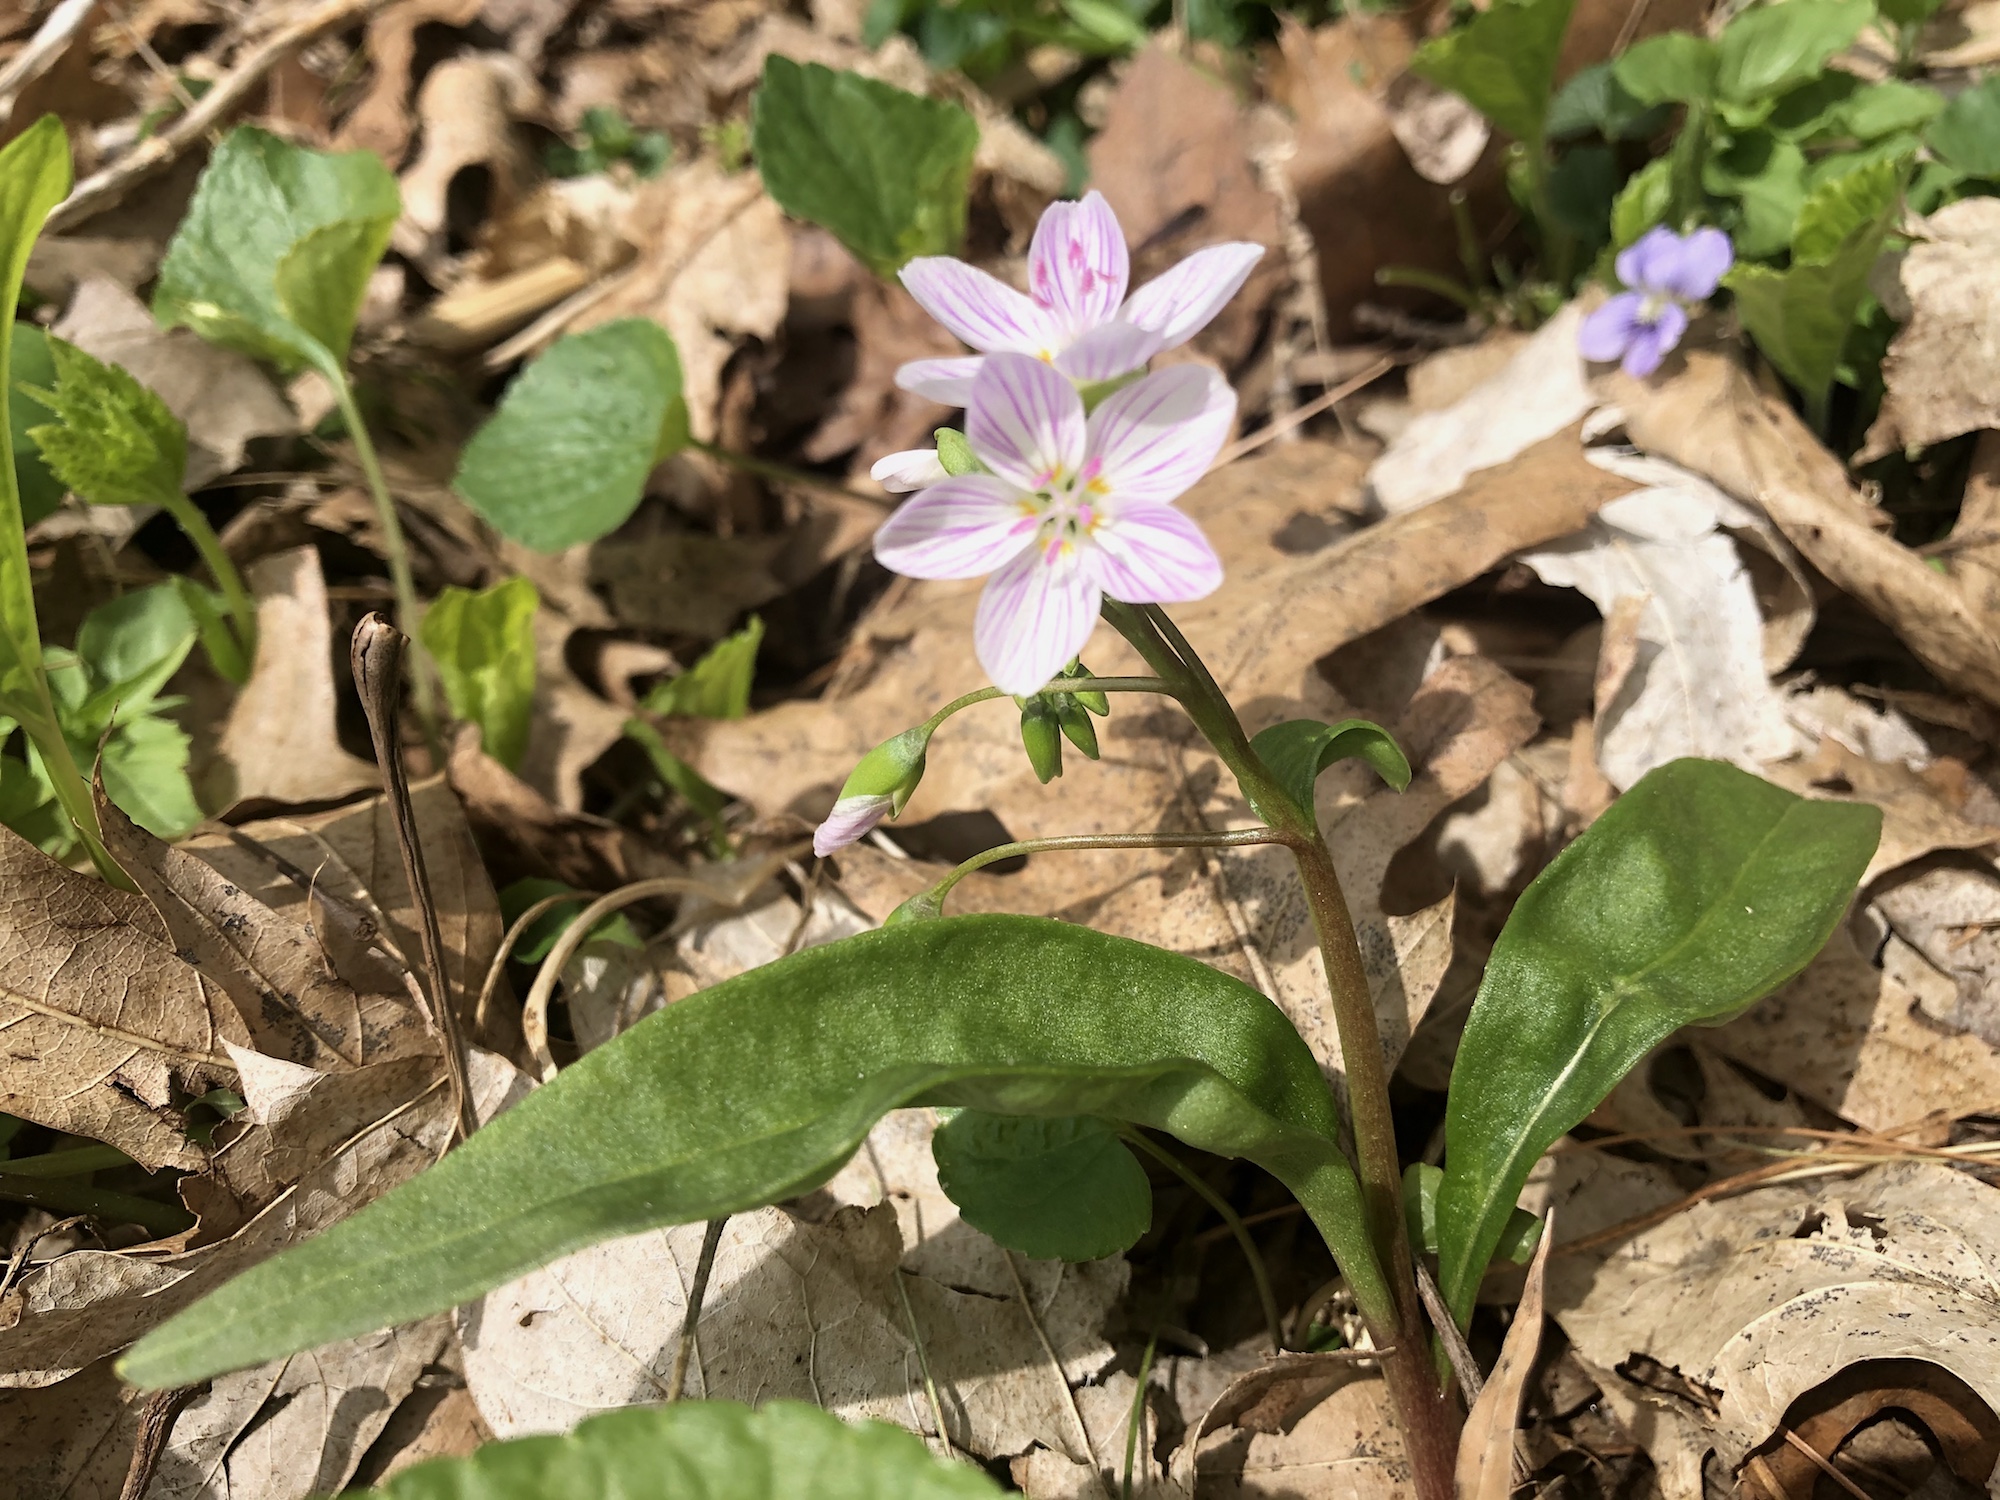 Springbeauty in the Maple-Basswood Forest of the University of Wisconsin Arboretum in Madison, Wisconsin on May 4, 2020.